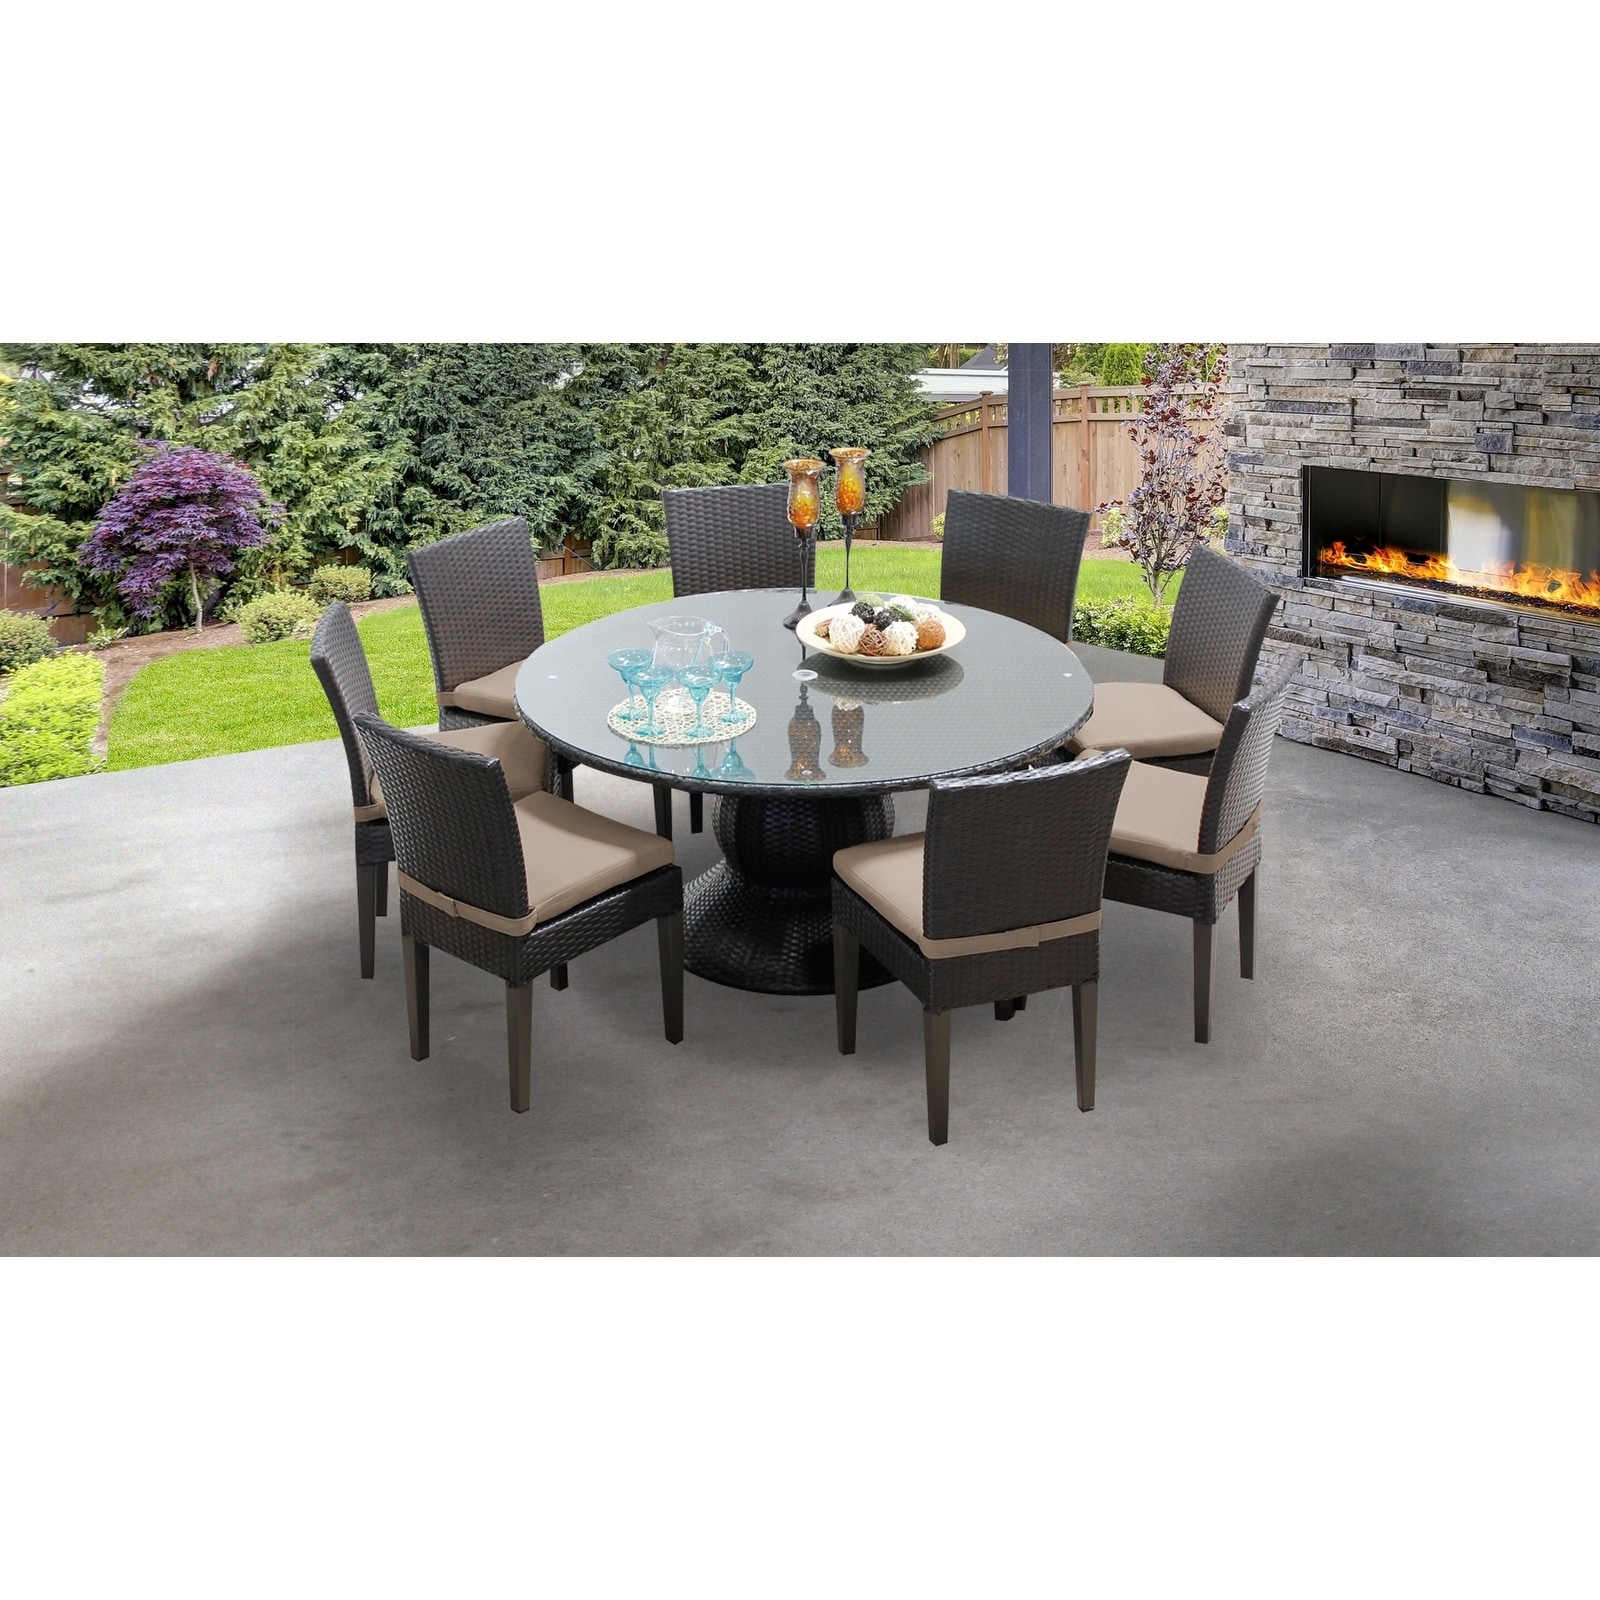 Barbados 60 Inch Outdoor Patio Dining Table With 8 Armless Chairs